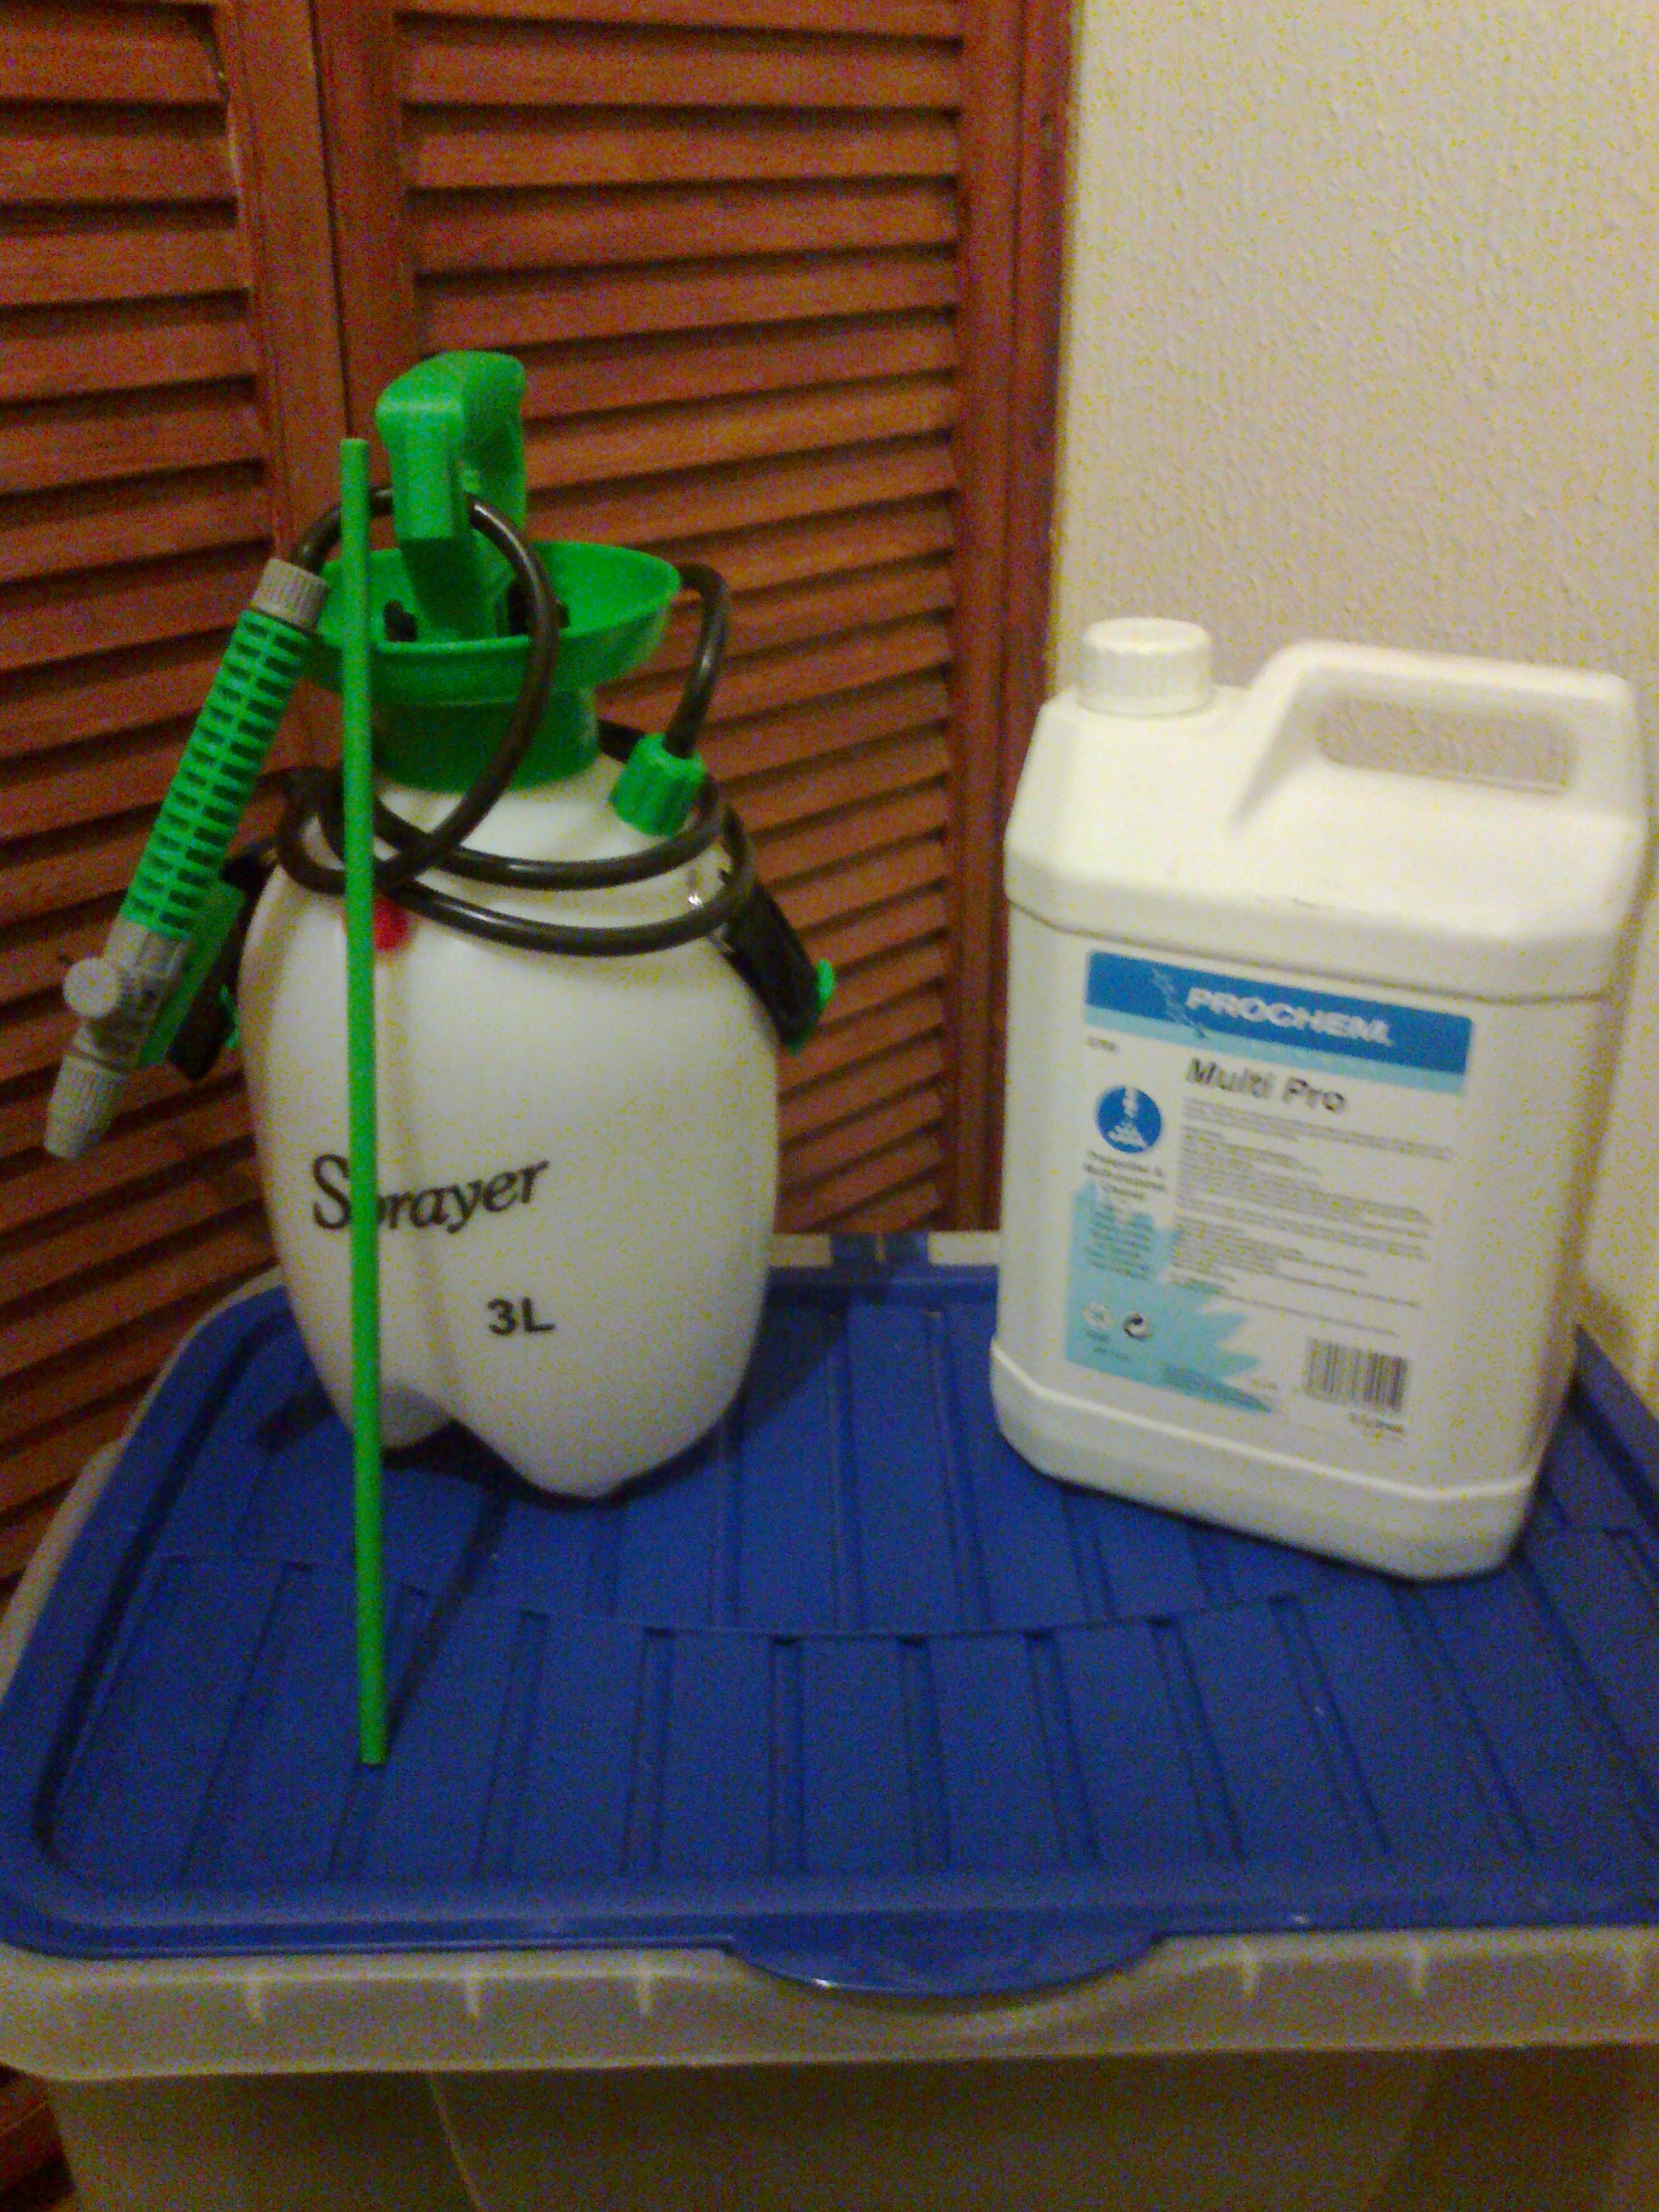 You will need a pump up pressure sprayer and a pre-spray solution.